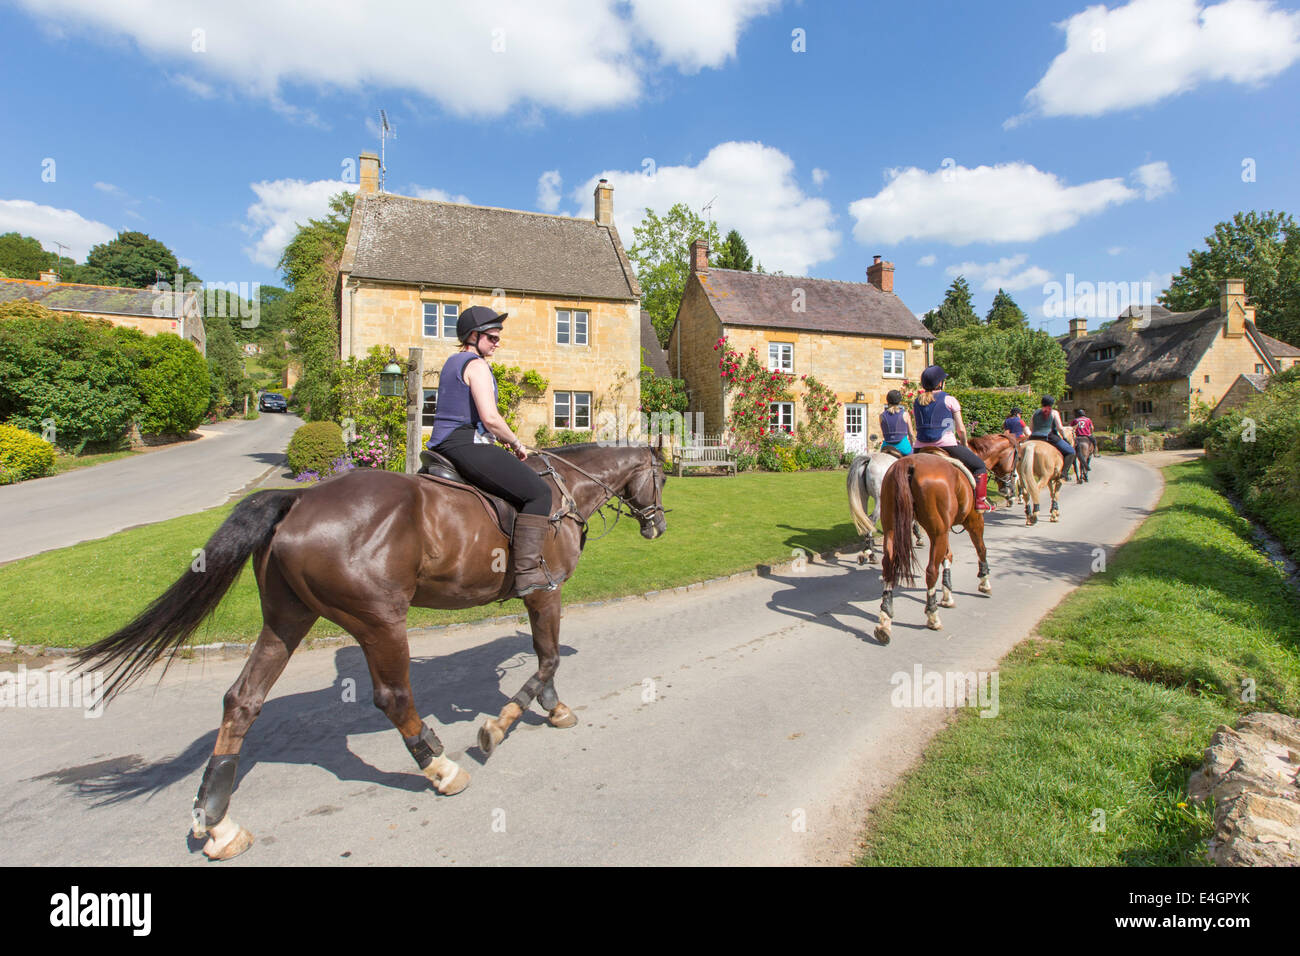 Horse riding in the Cotswold village of Stanton, Gloucestershire, England, UK Stock Photo